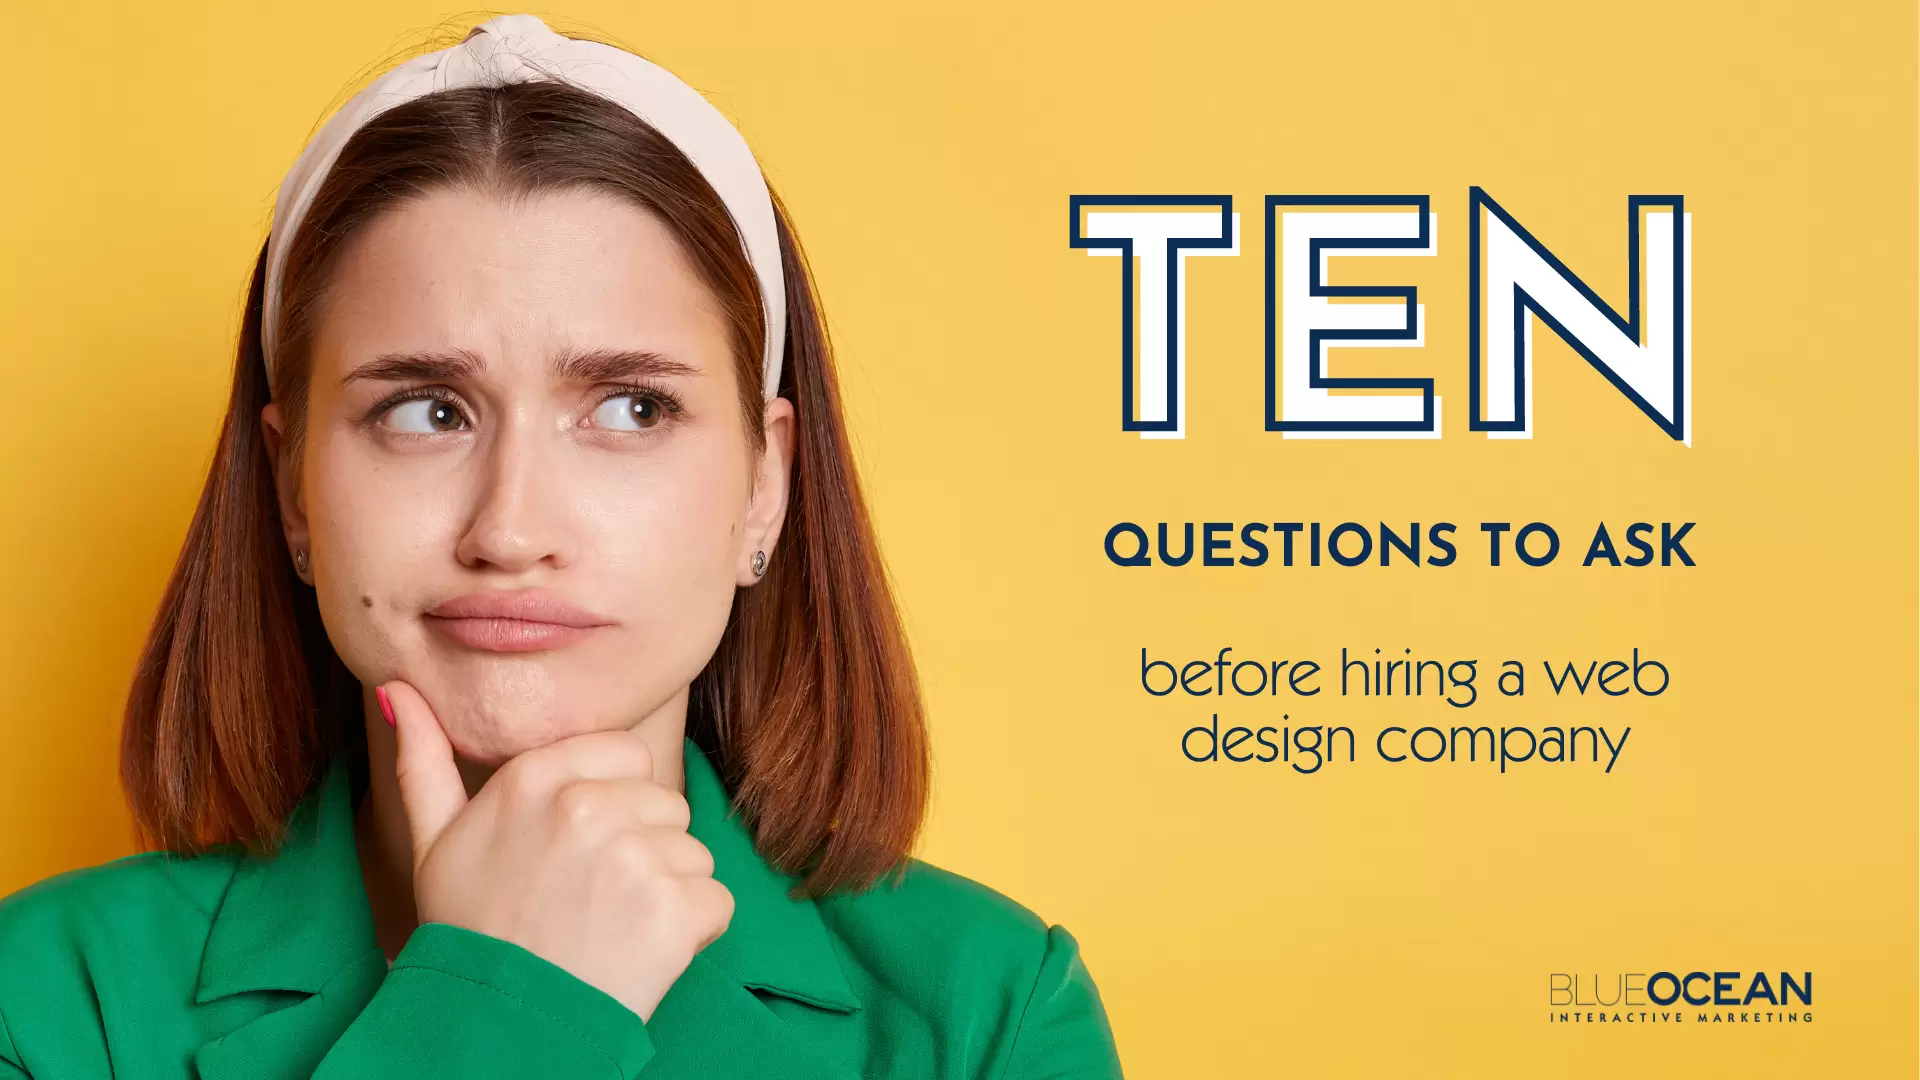 QUESTIONS TO ASK BEFORE HIRING A WEBSITE DESIGN COMPANY